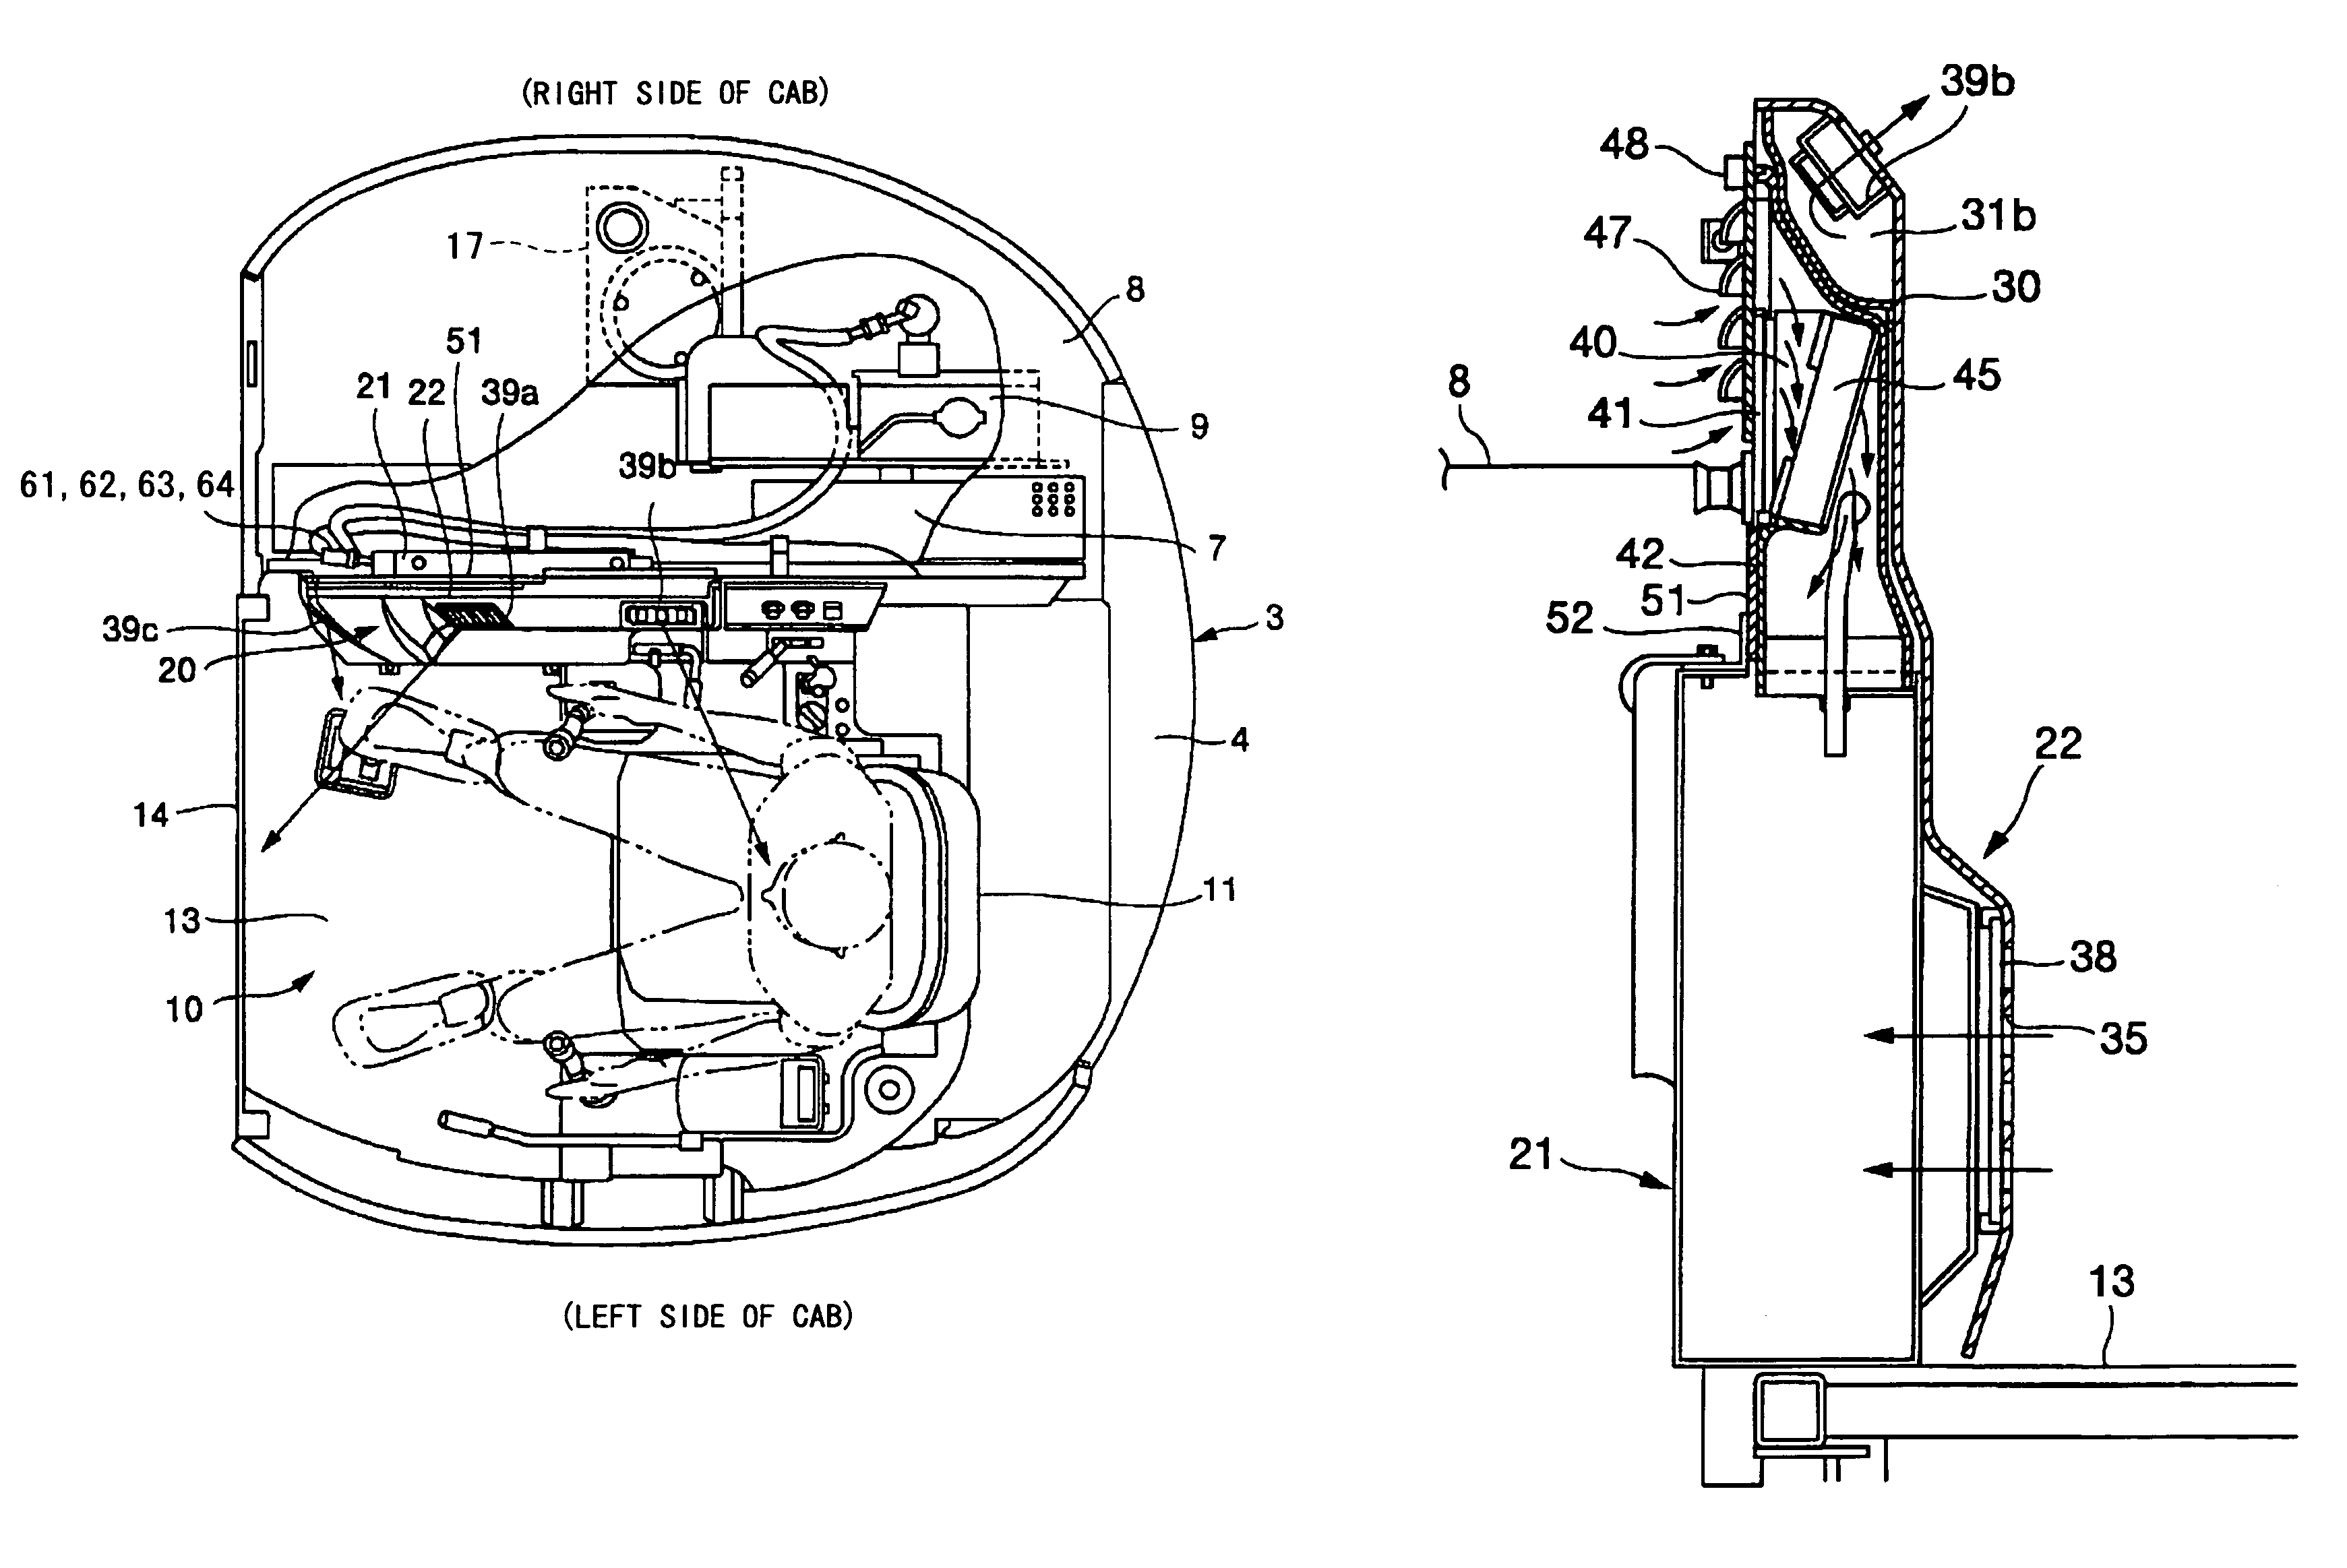 Air conditioning apparatus for hydraulic shovel